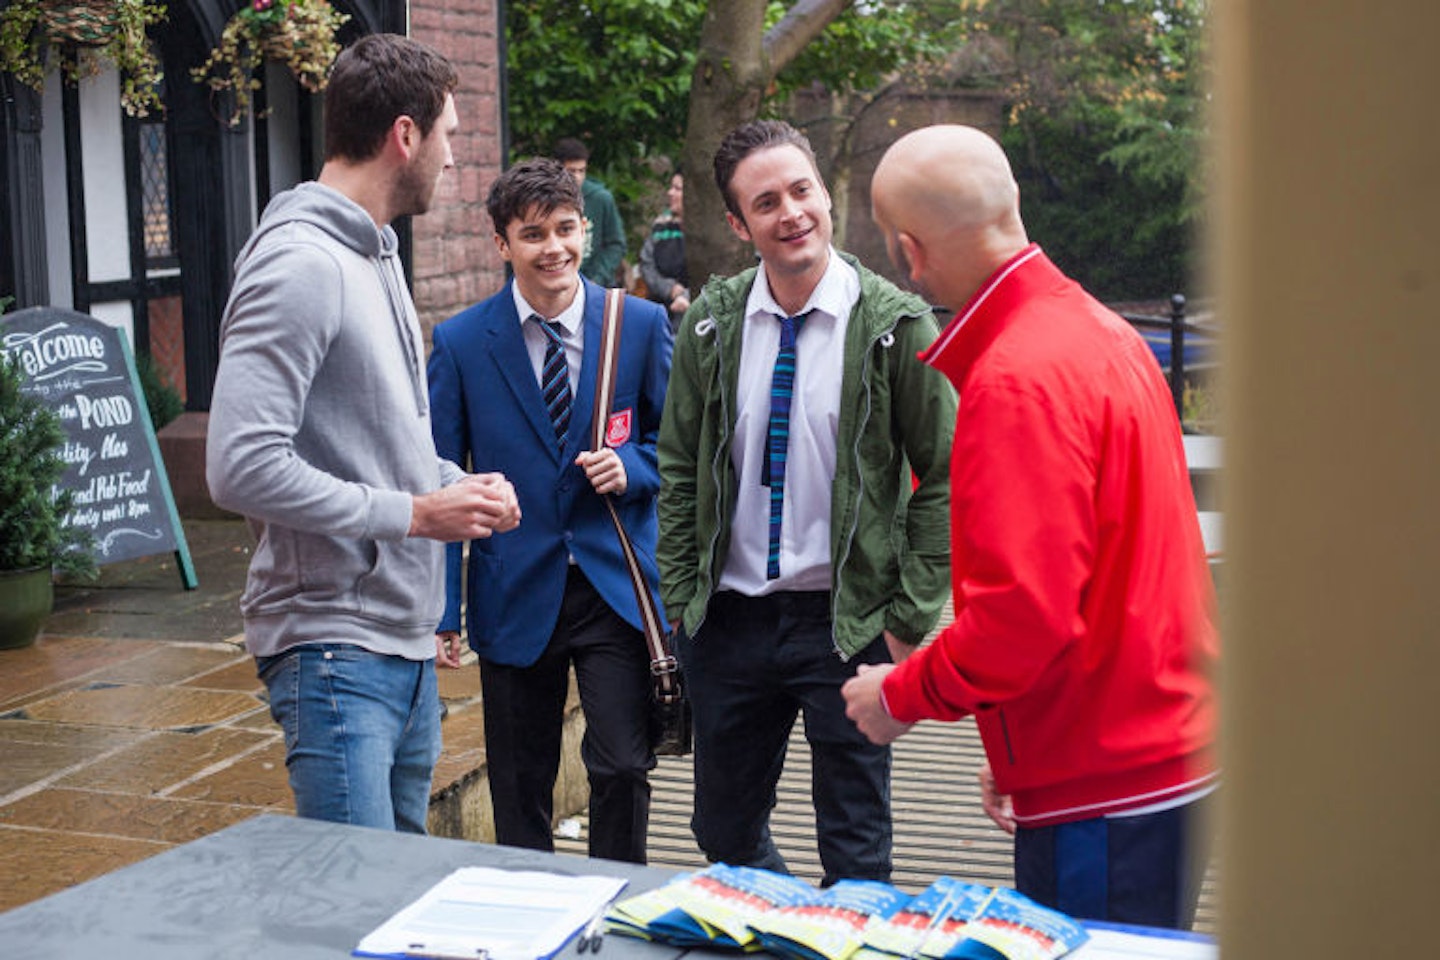 Hollyoaks Ollie Morgan Buster Smith grooming storyline